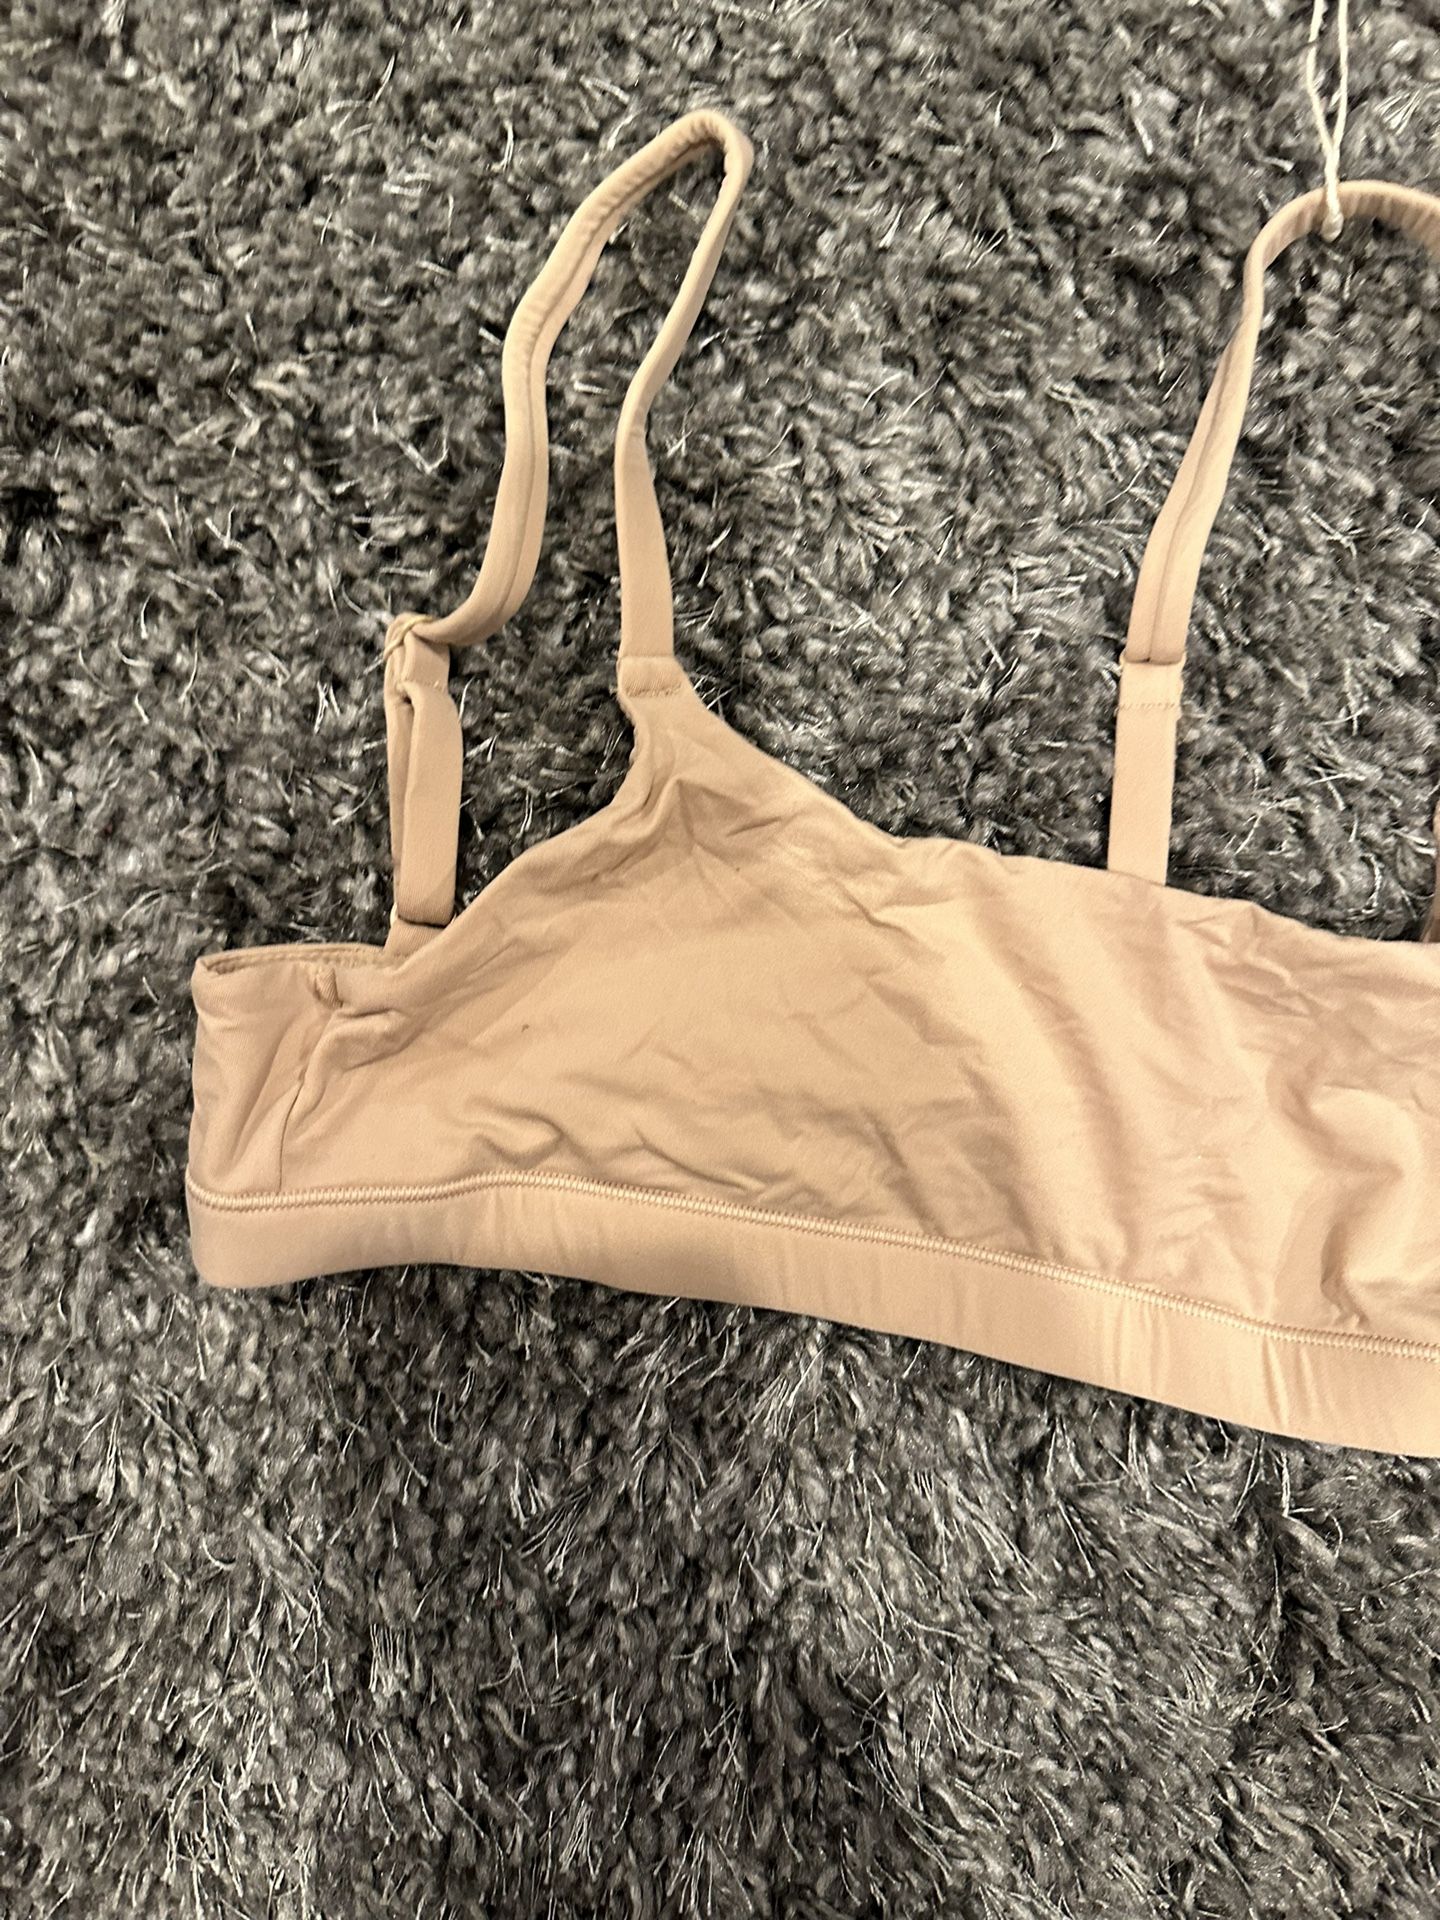 Brand New SKIMS Bra - Size Small for Sale in St. Louis, MO - OfferUp